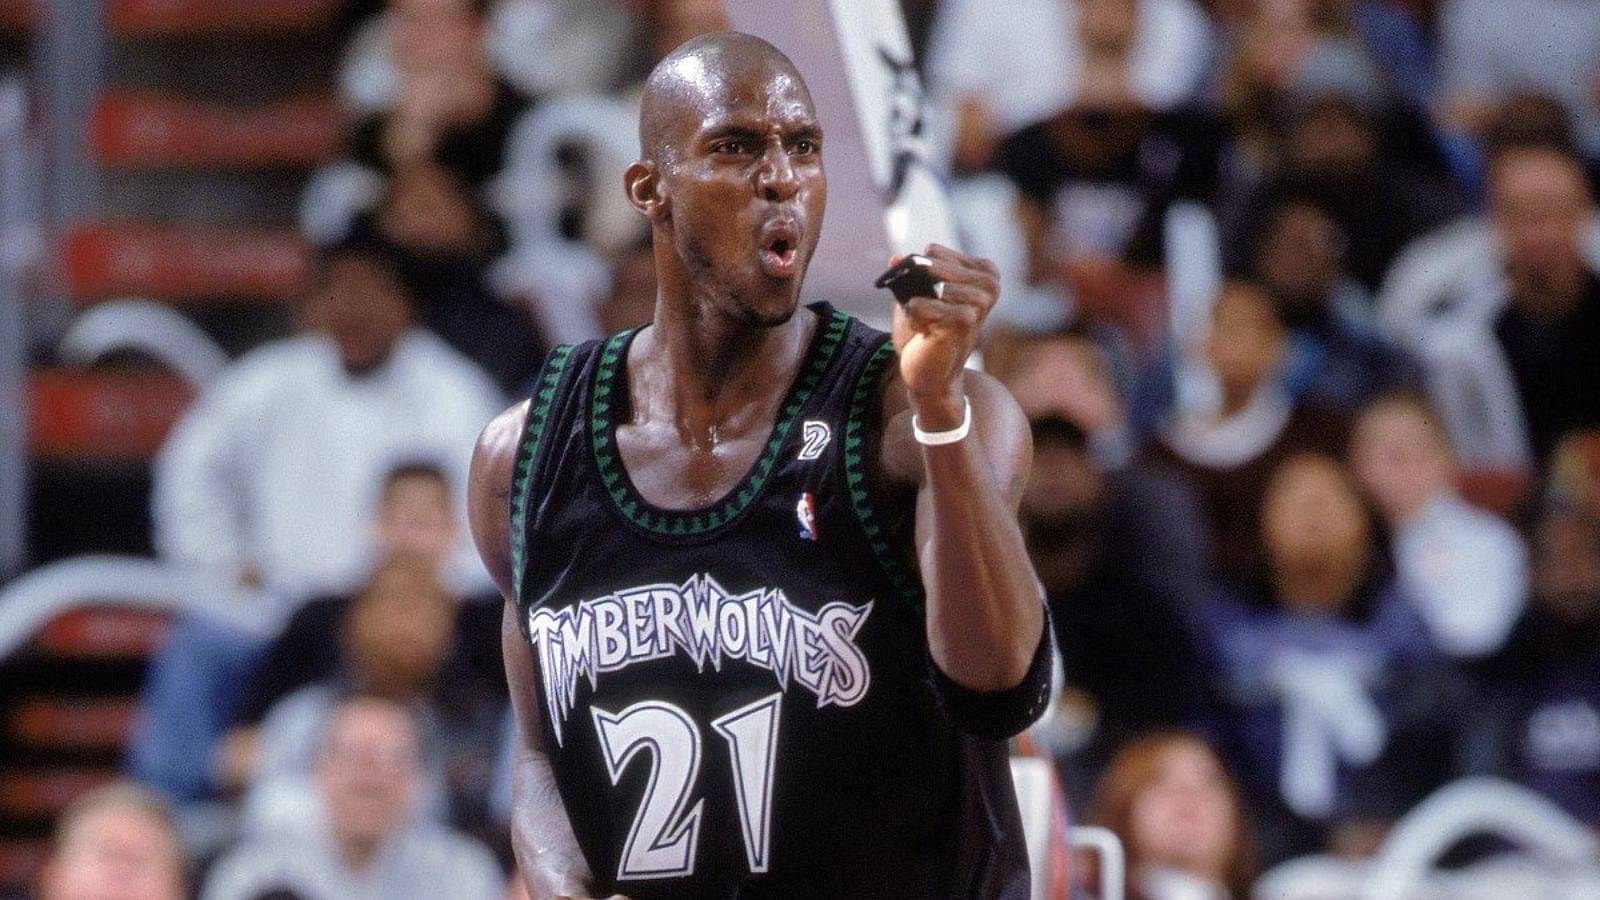 A former Kevin Garnett teammate turned down $21.4 million contract with Timberwolves only to bankrupt later